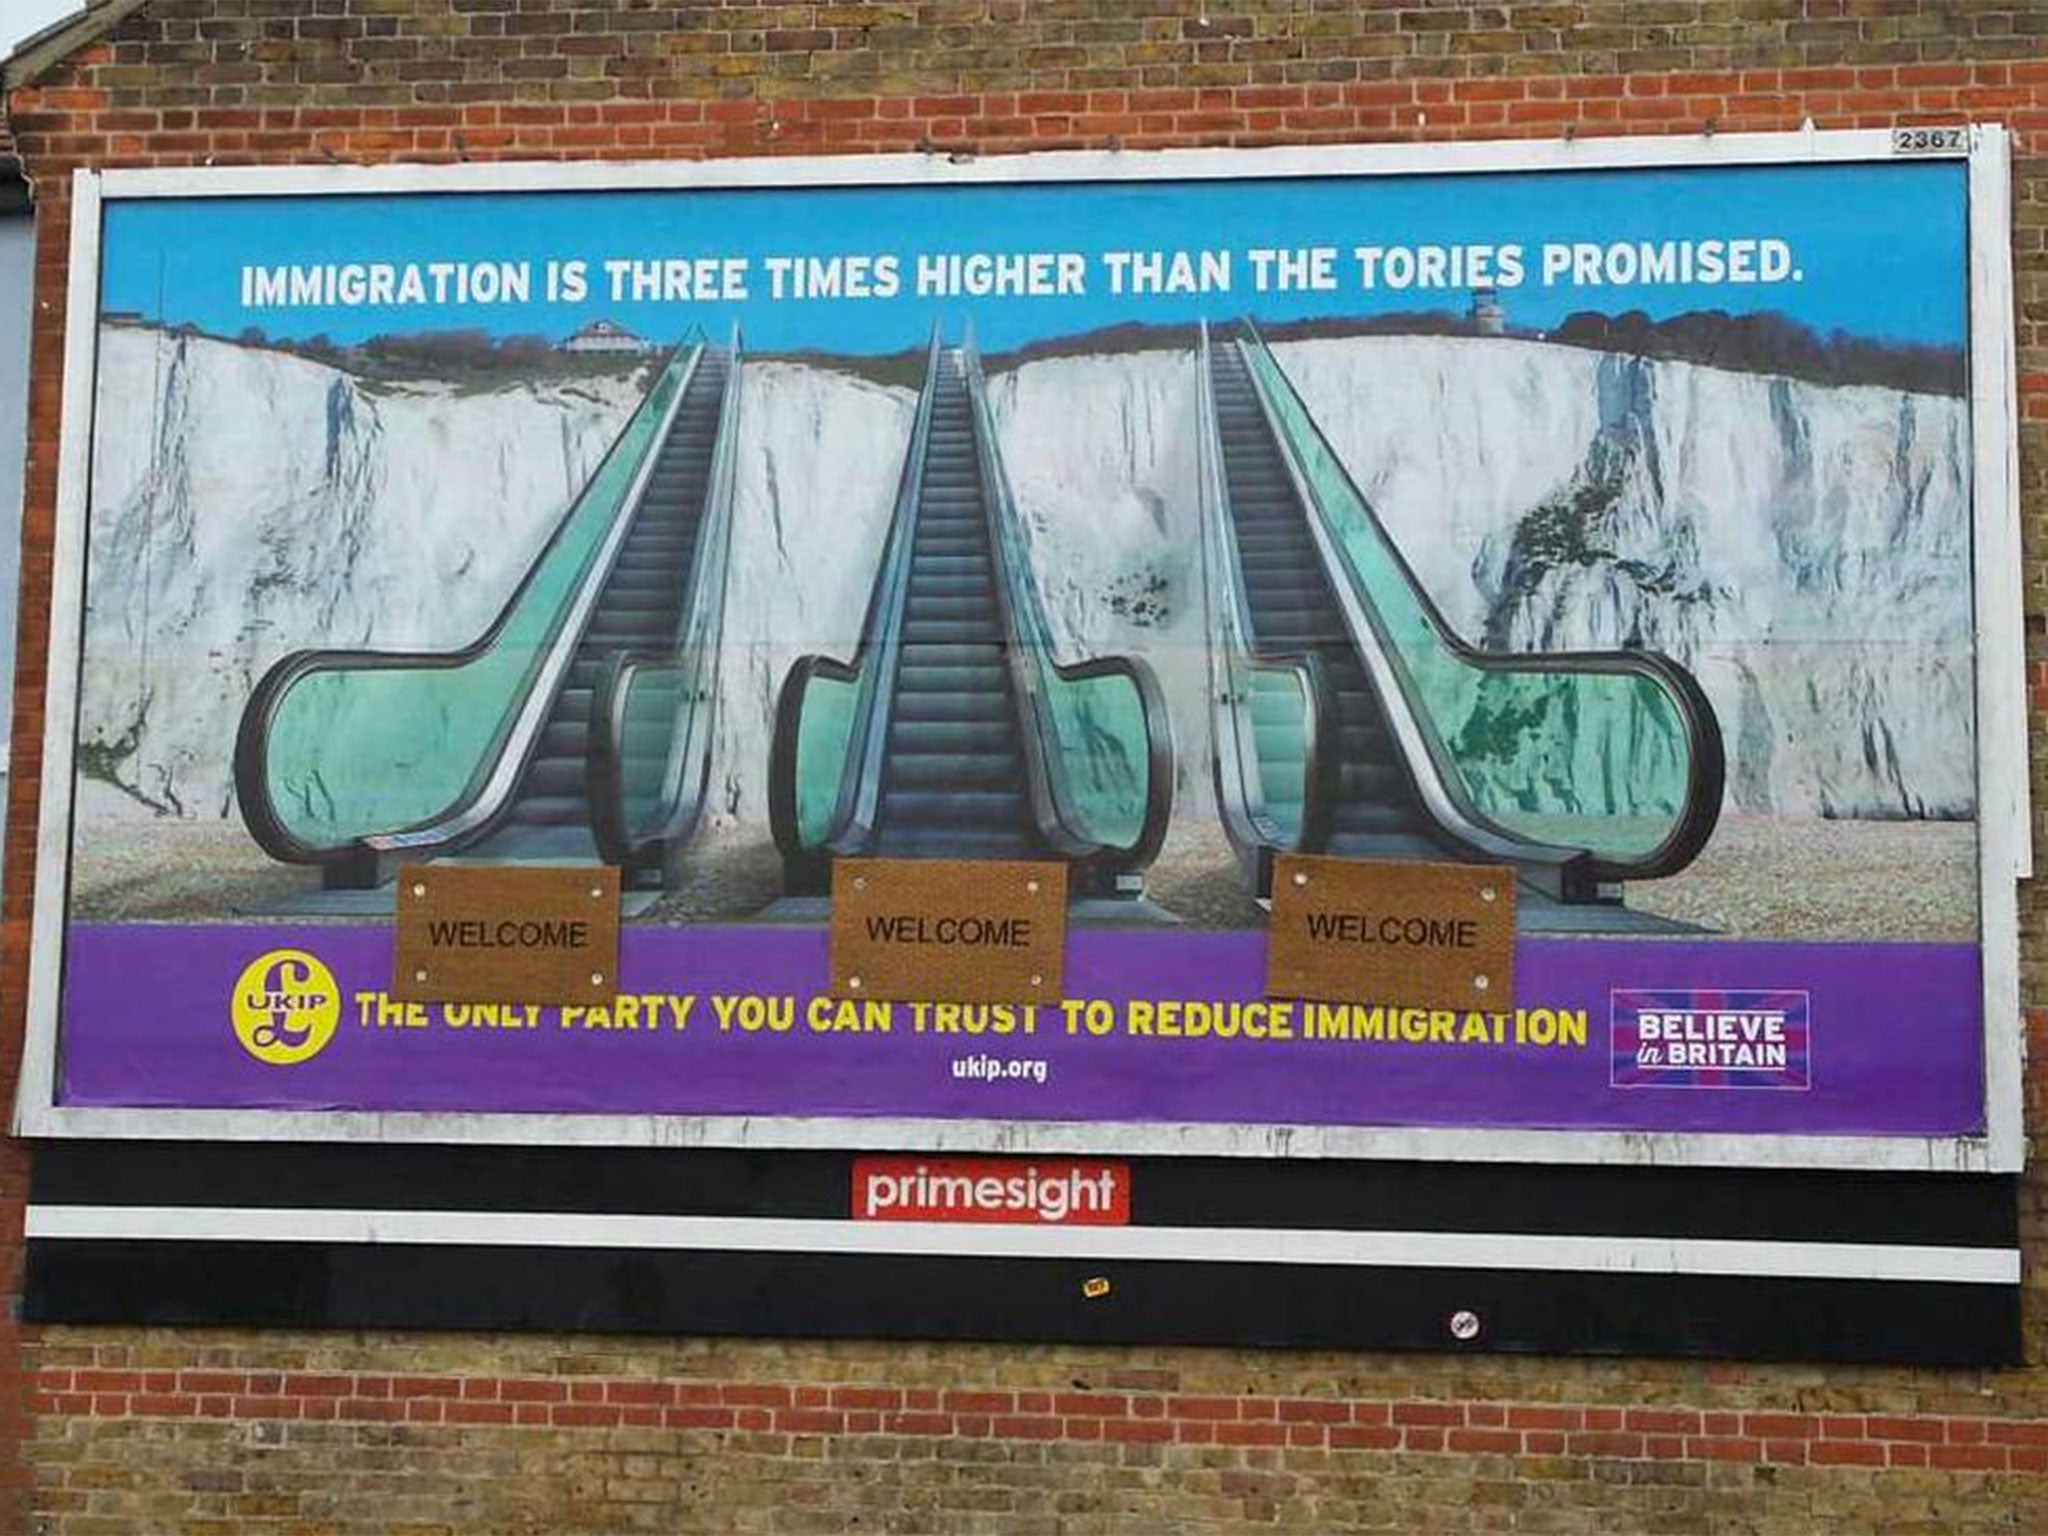 A Ukip poster in Ramsgate, Kent, has been defaced with the addition of three welcome mats